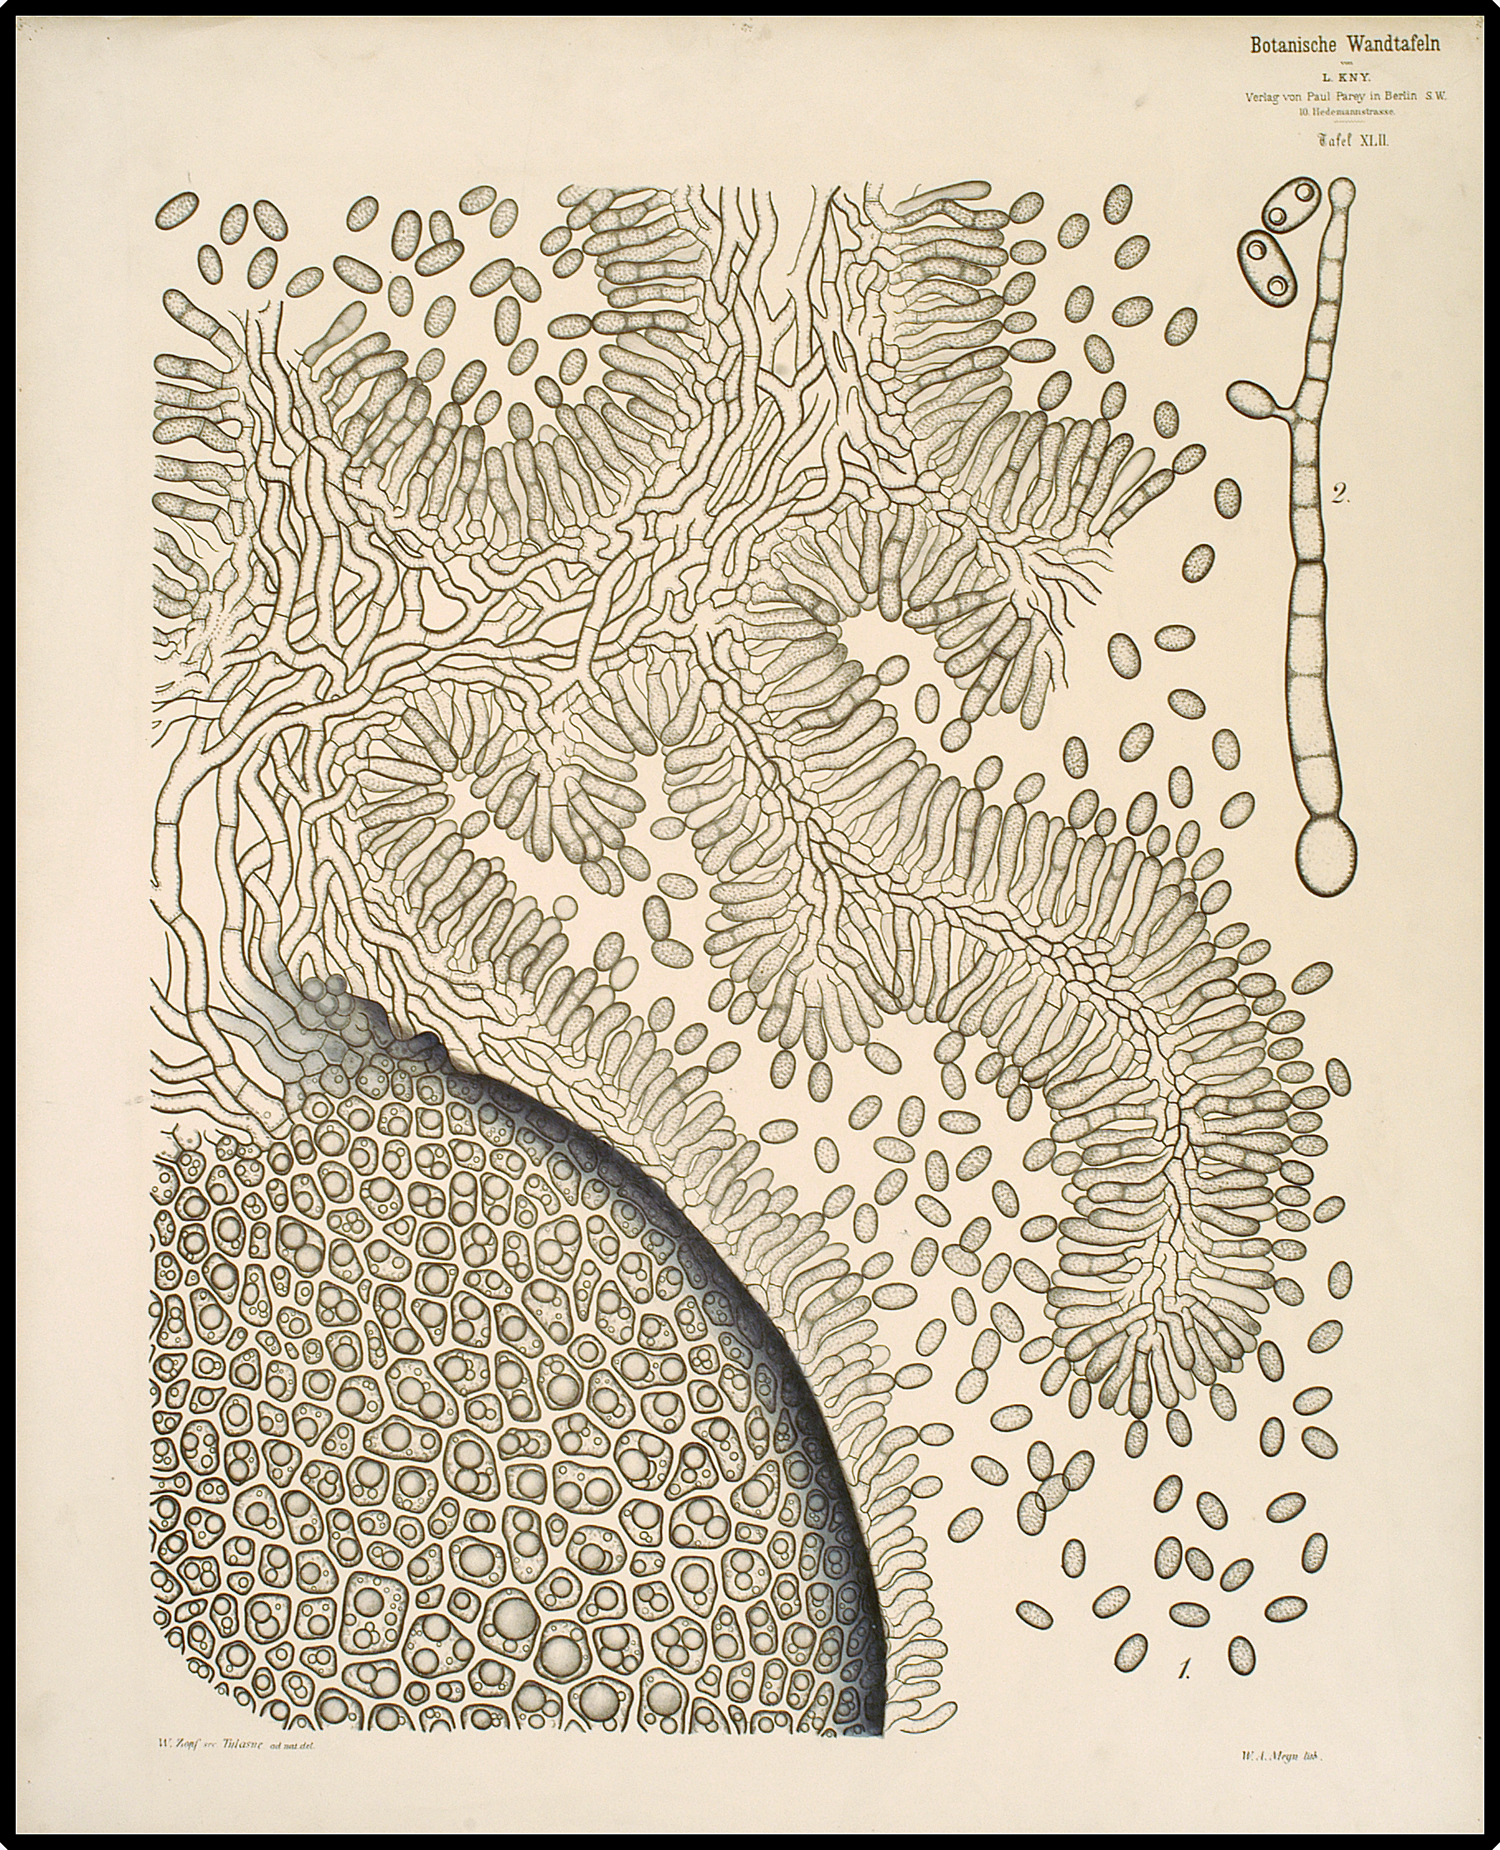 Teaching chart showing Ergot. The image is black on a cream background and features a cluster of cells